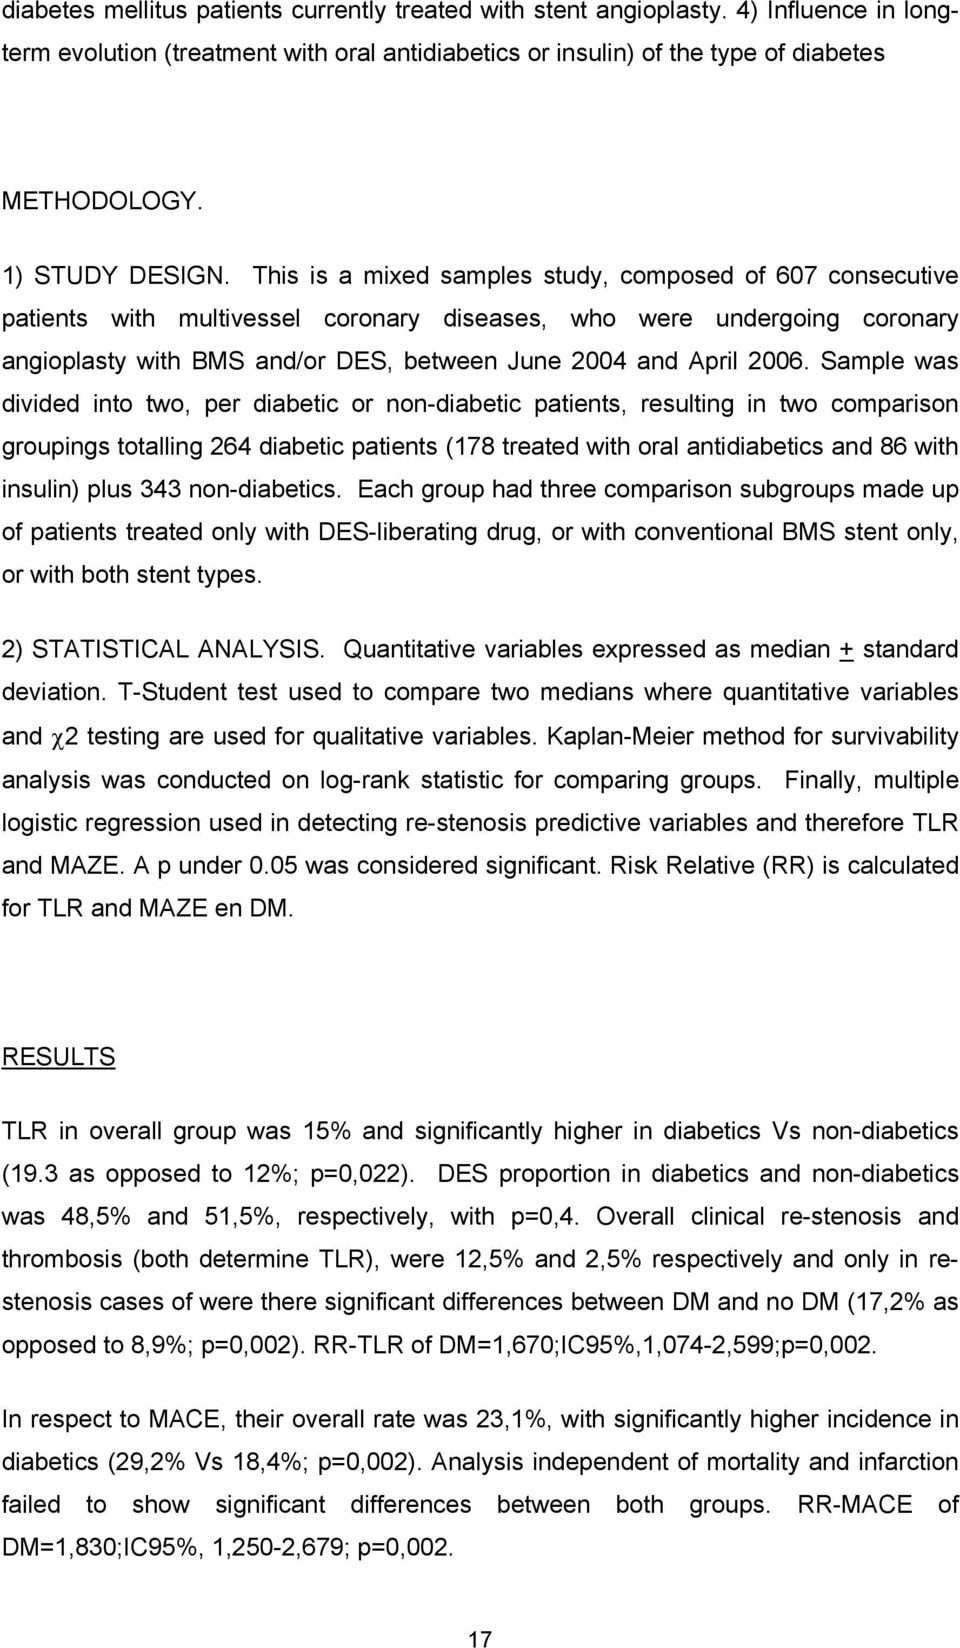 This is a mixed samples study, composed of 607 consecutive patients with multivessel coronary diseases, who were undergoing coronary angioplasty with BMS and/or DES, between June 2004 and April 2006.